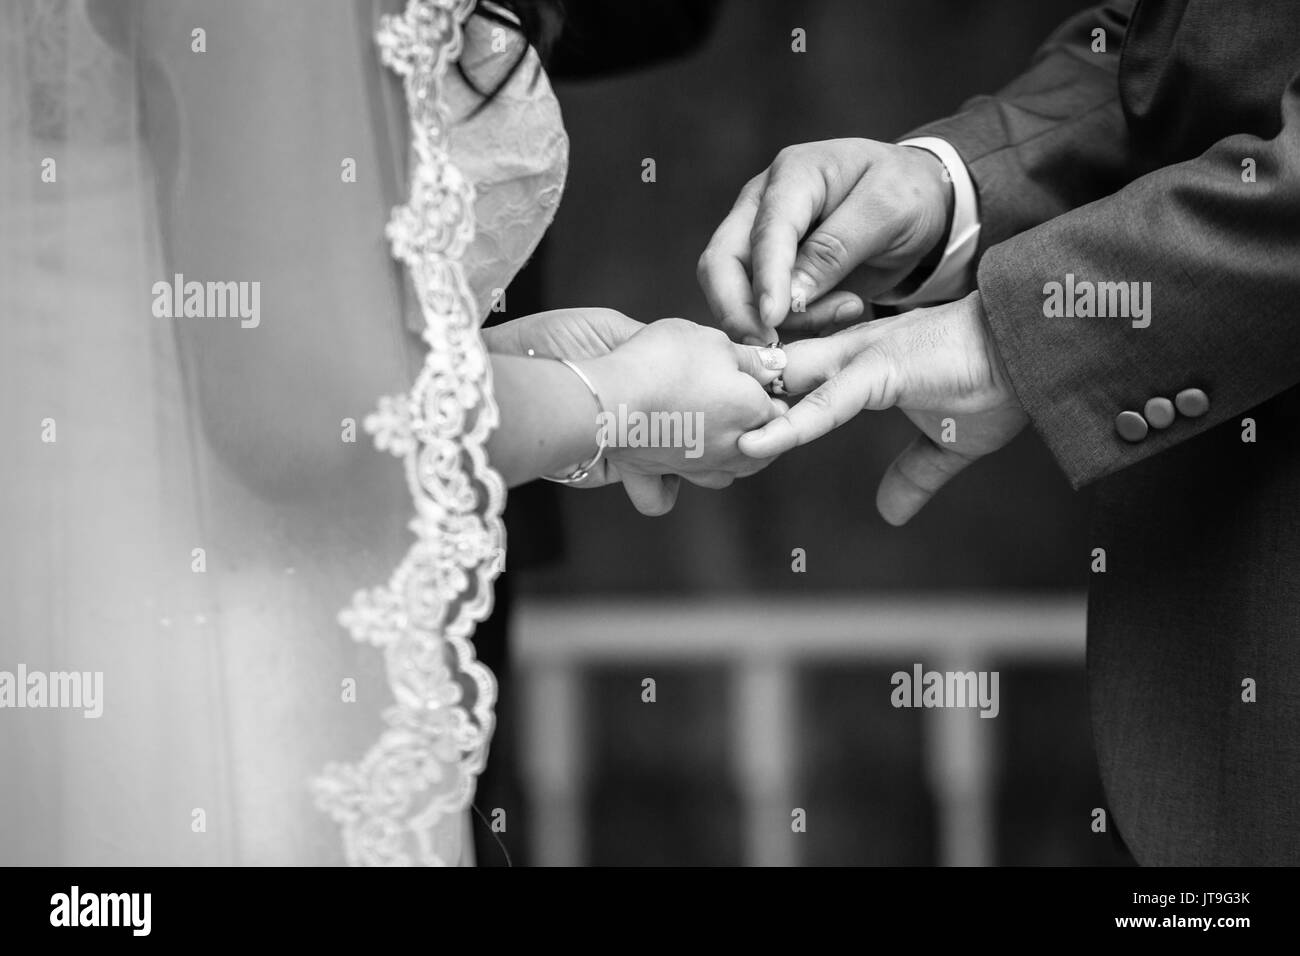 Two people getting married Stock Photo